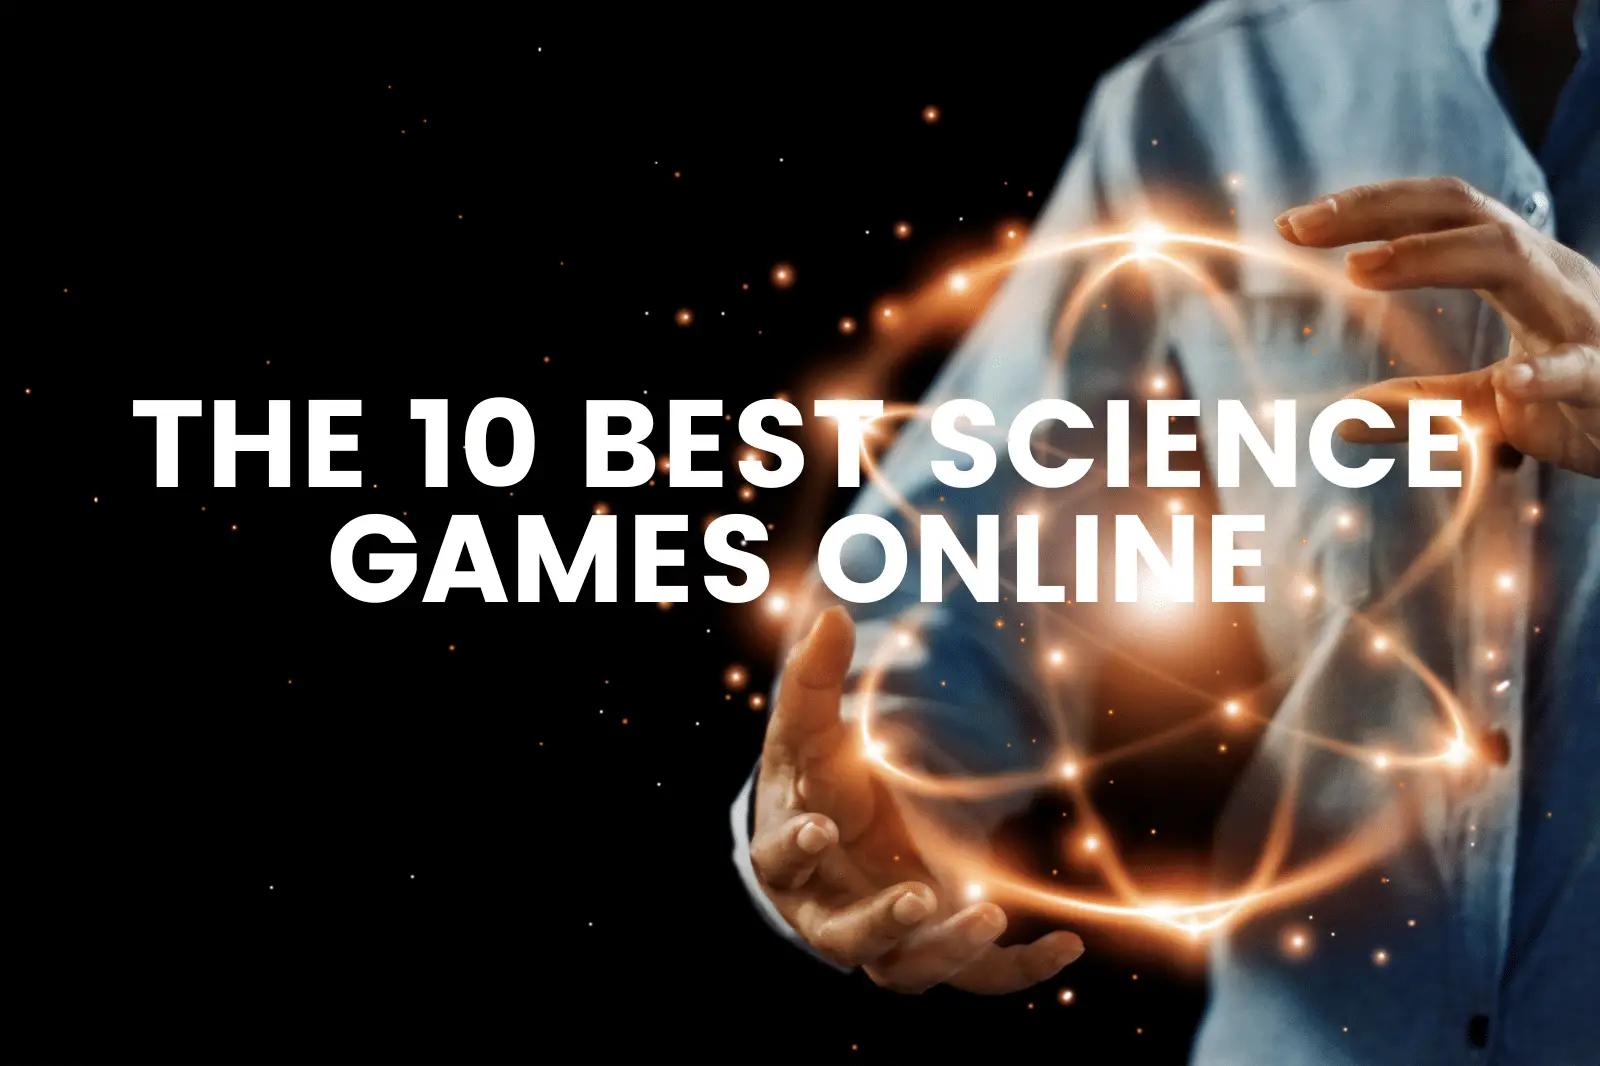 The 10 Best Science Games Online